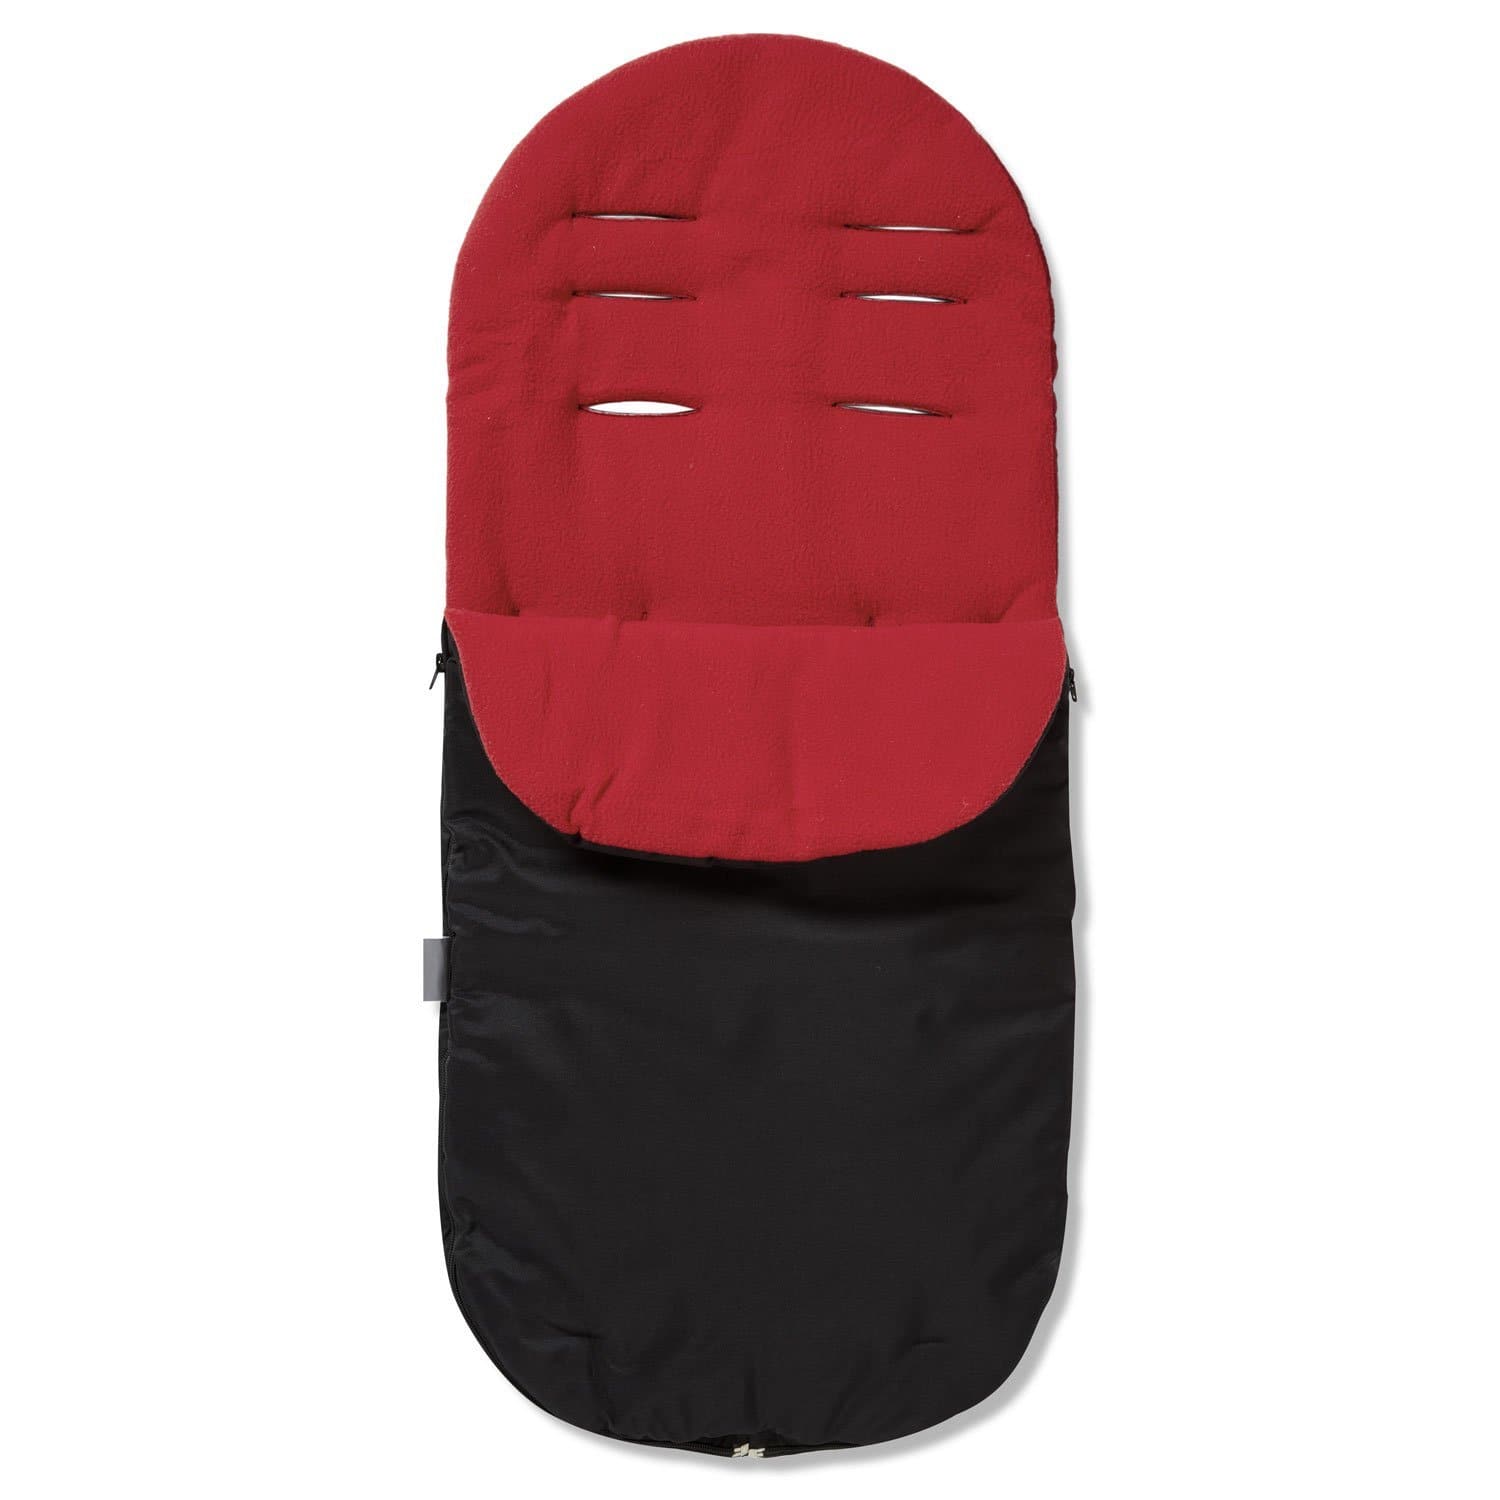 Footmuff / Cosy Toes Compatible with My Babiie - Red / Fits All Models | For Your Little One